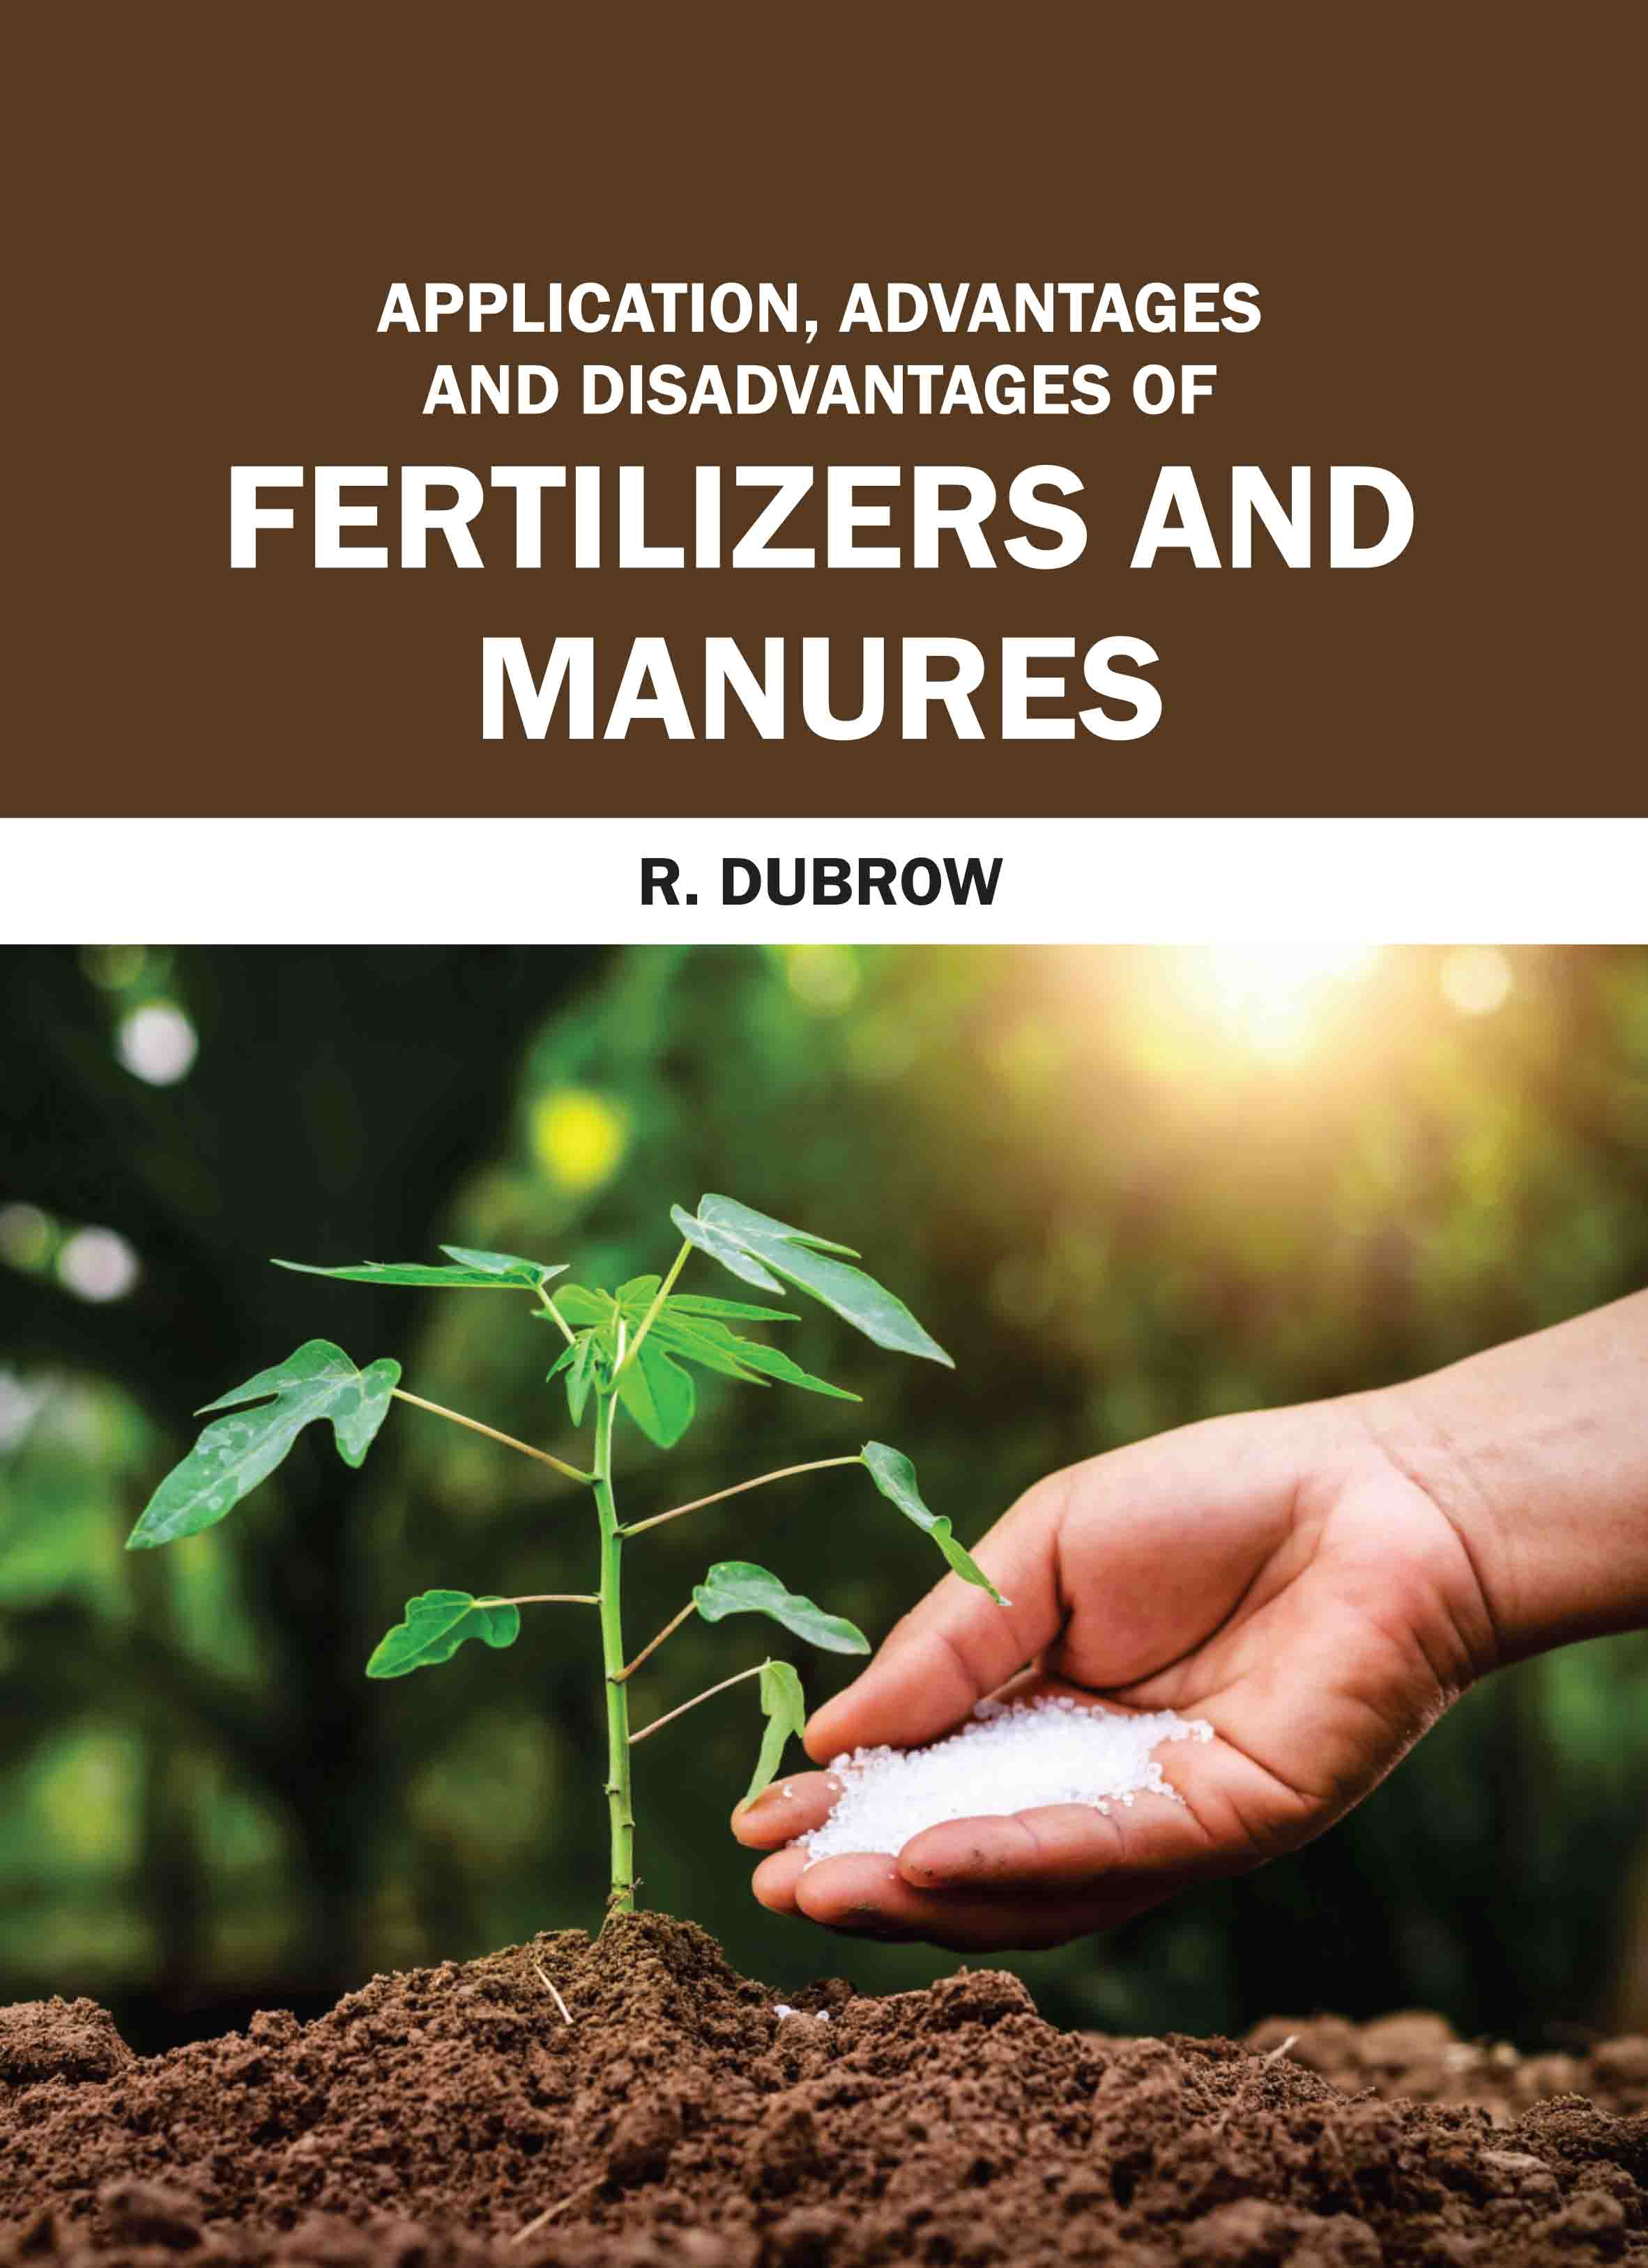 Application, Advantages and Disadvantages of Fertilizers and Manures